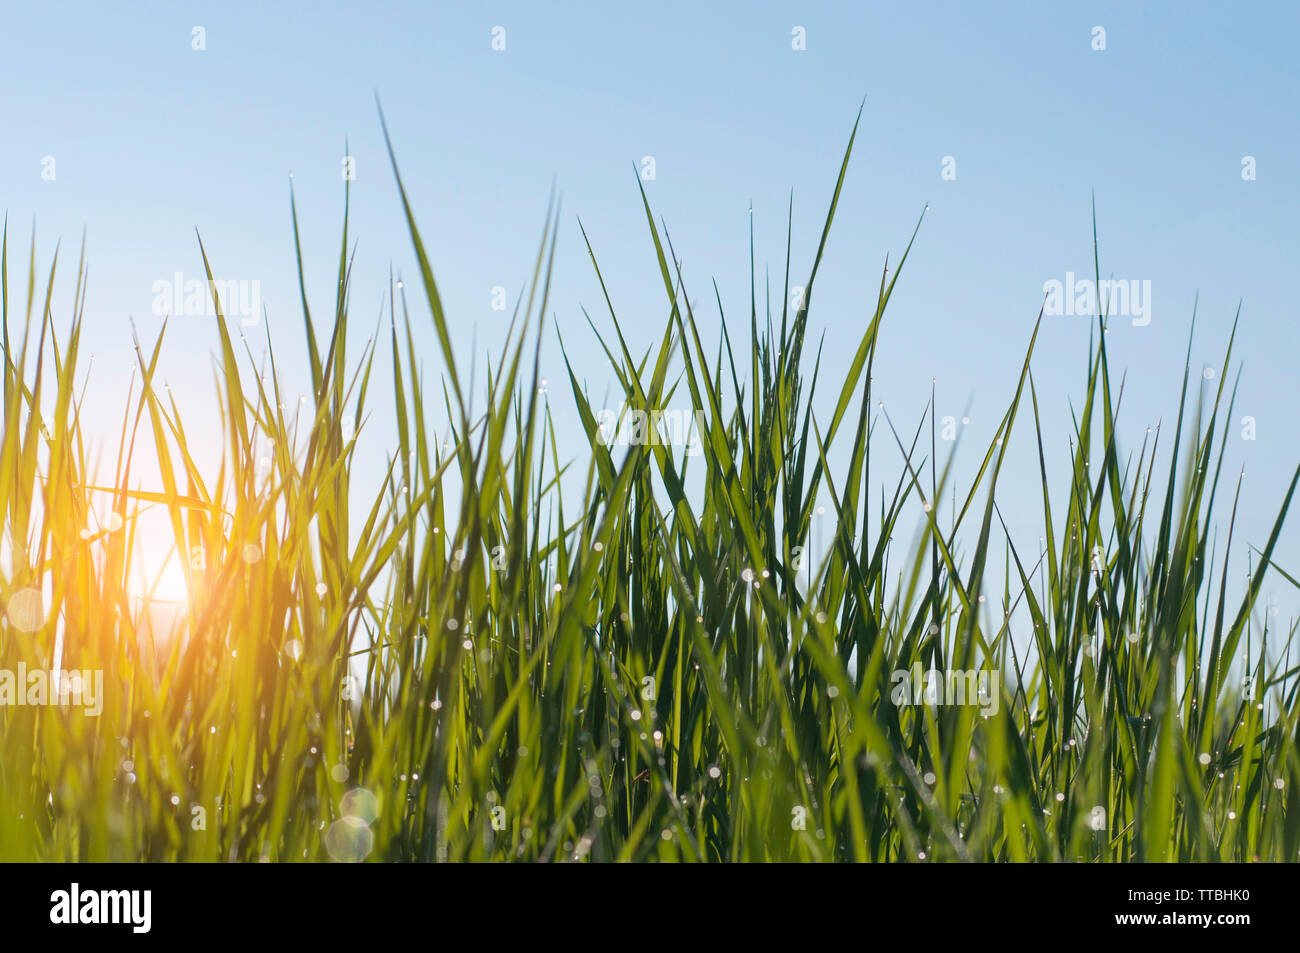 shiny droplets of morning dew on the green grass in the rays of the rising sun against the blue sky Stock Photo